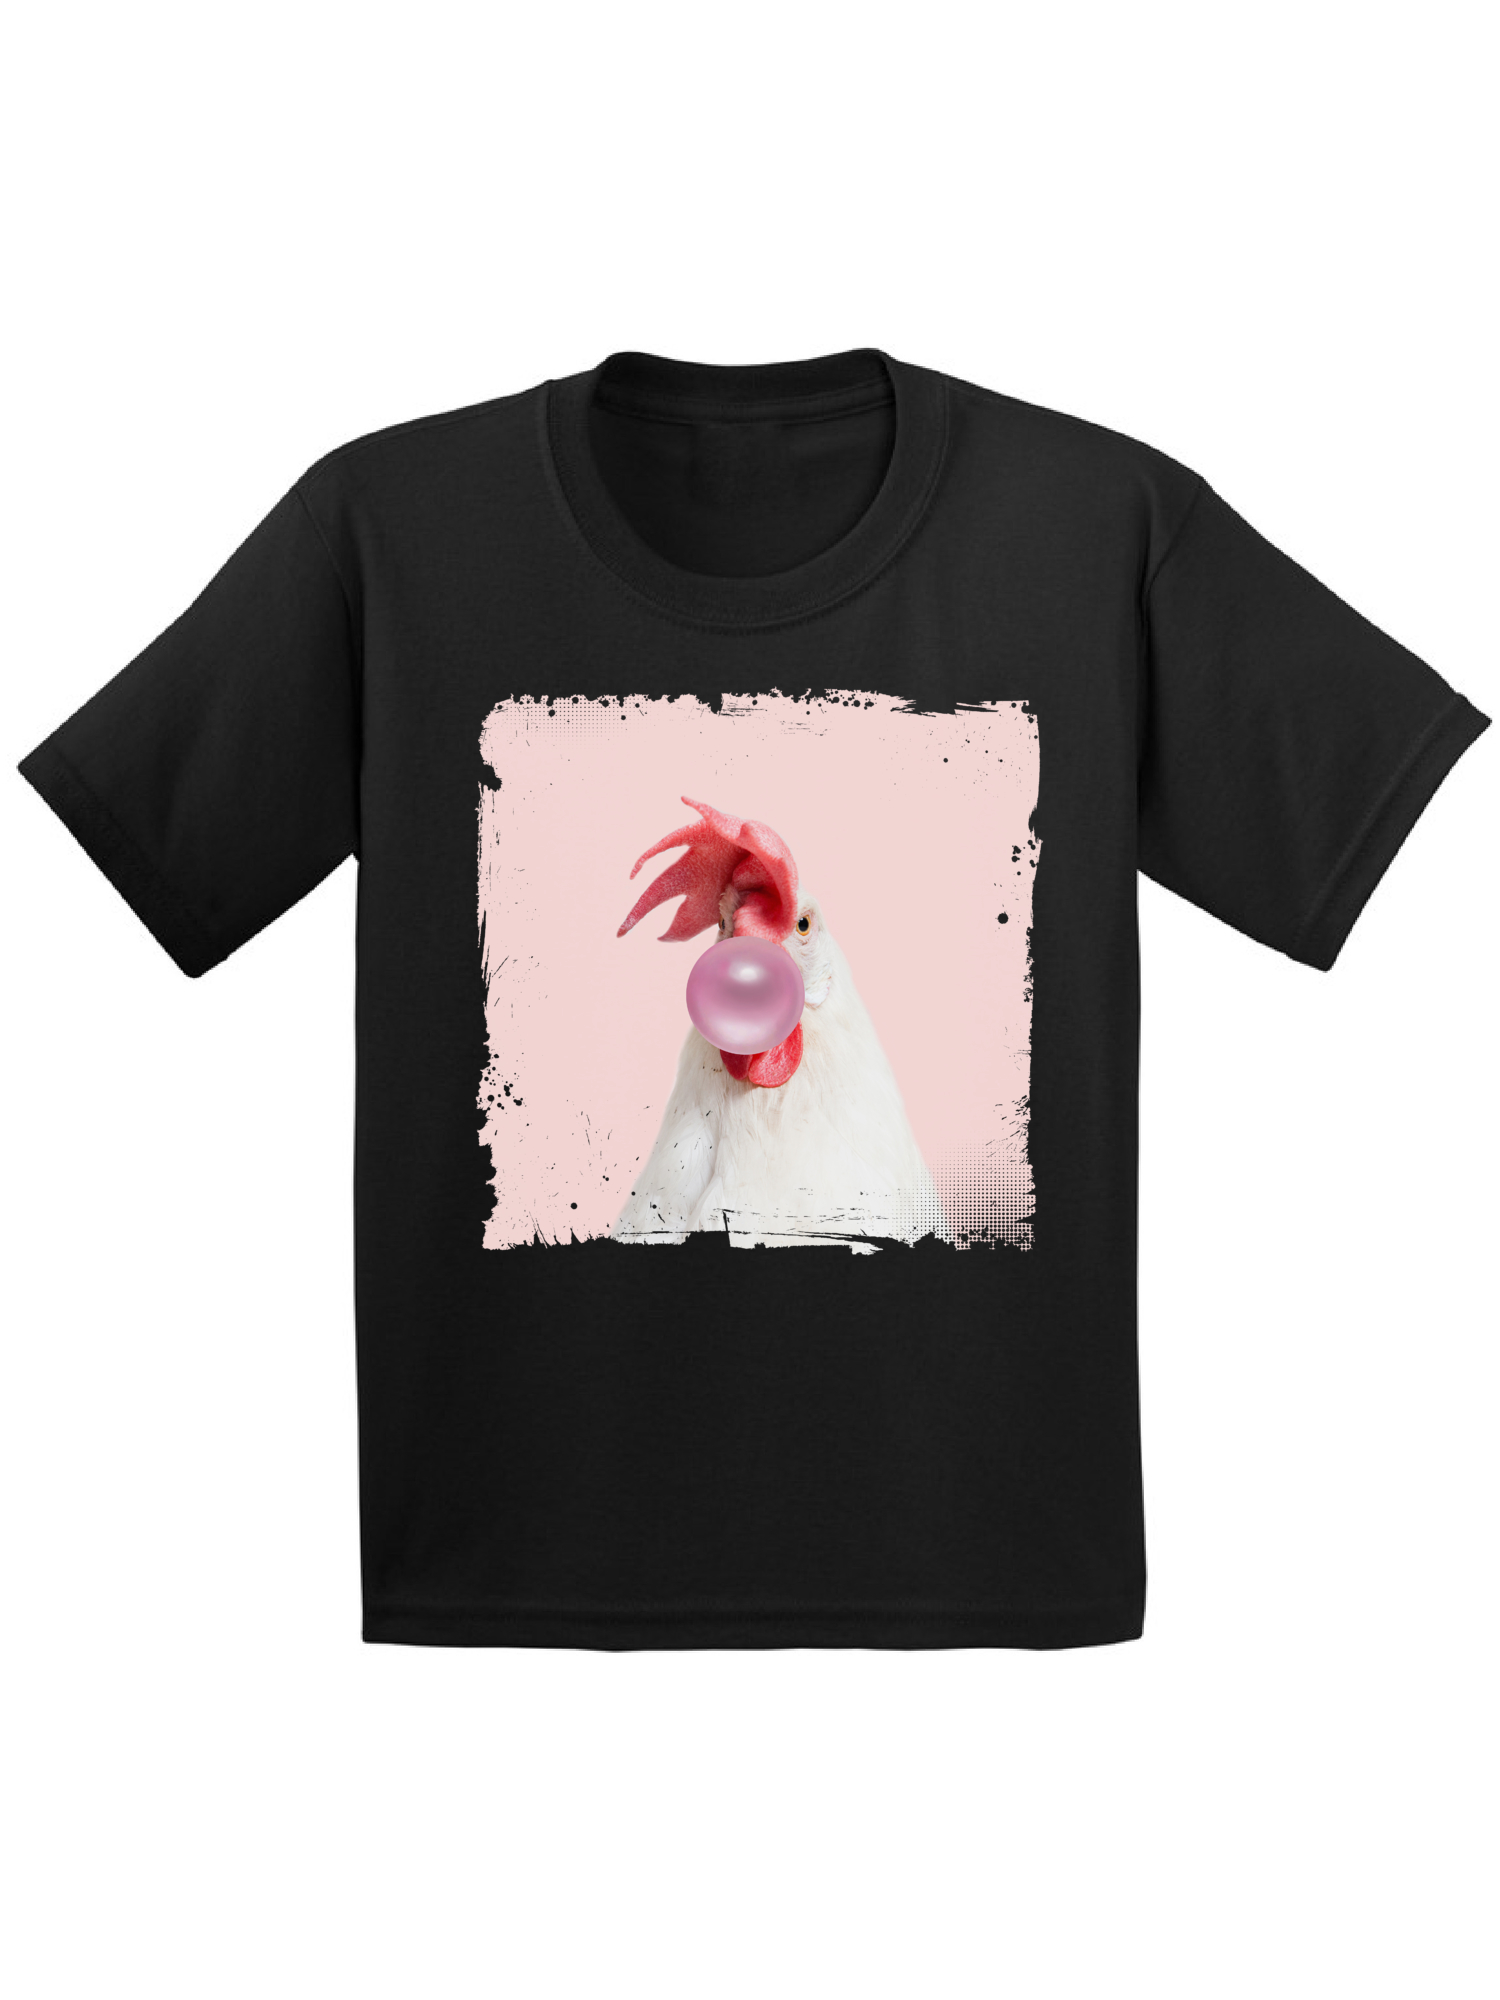 Awkward Styles Pink Bubble Shirt Cute Infant Shirt Rooster Shirt Animals Prints Kids T Shirt Rooster Infant Tshirt Cute Gifts for Children Clothing Lovely Shirt Rooster Lovers Funny Gifts for Kids - image 1 of 4